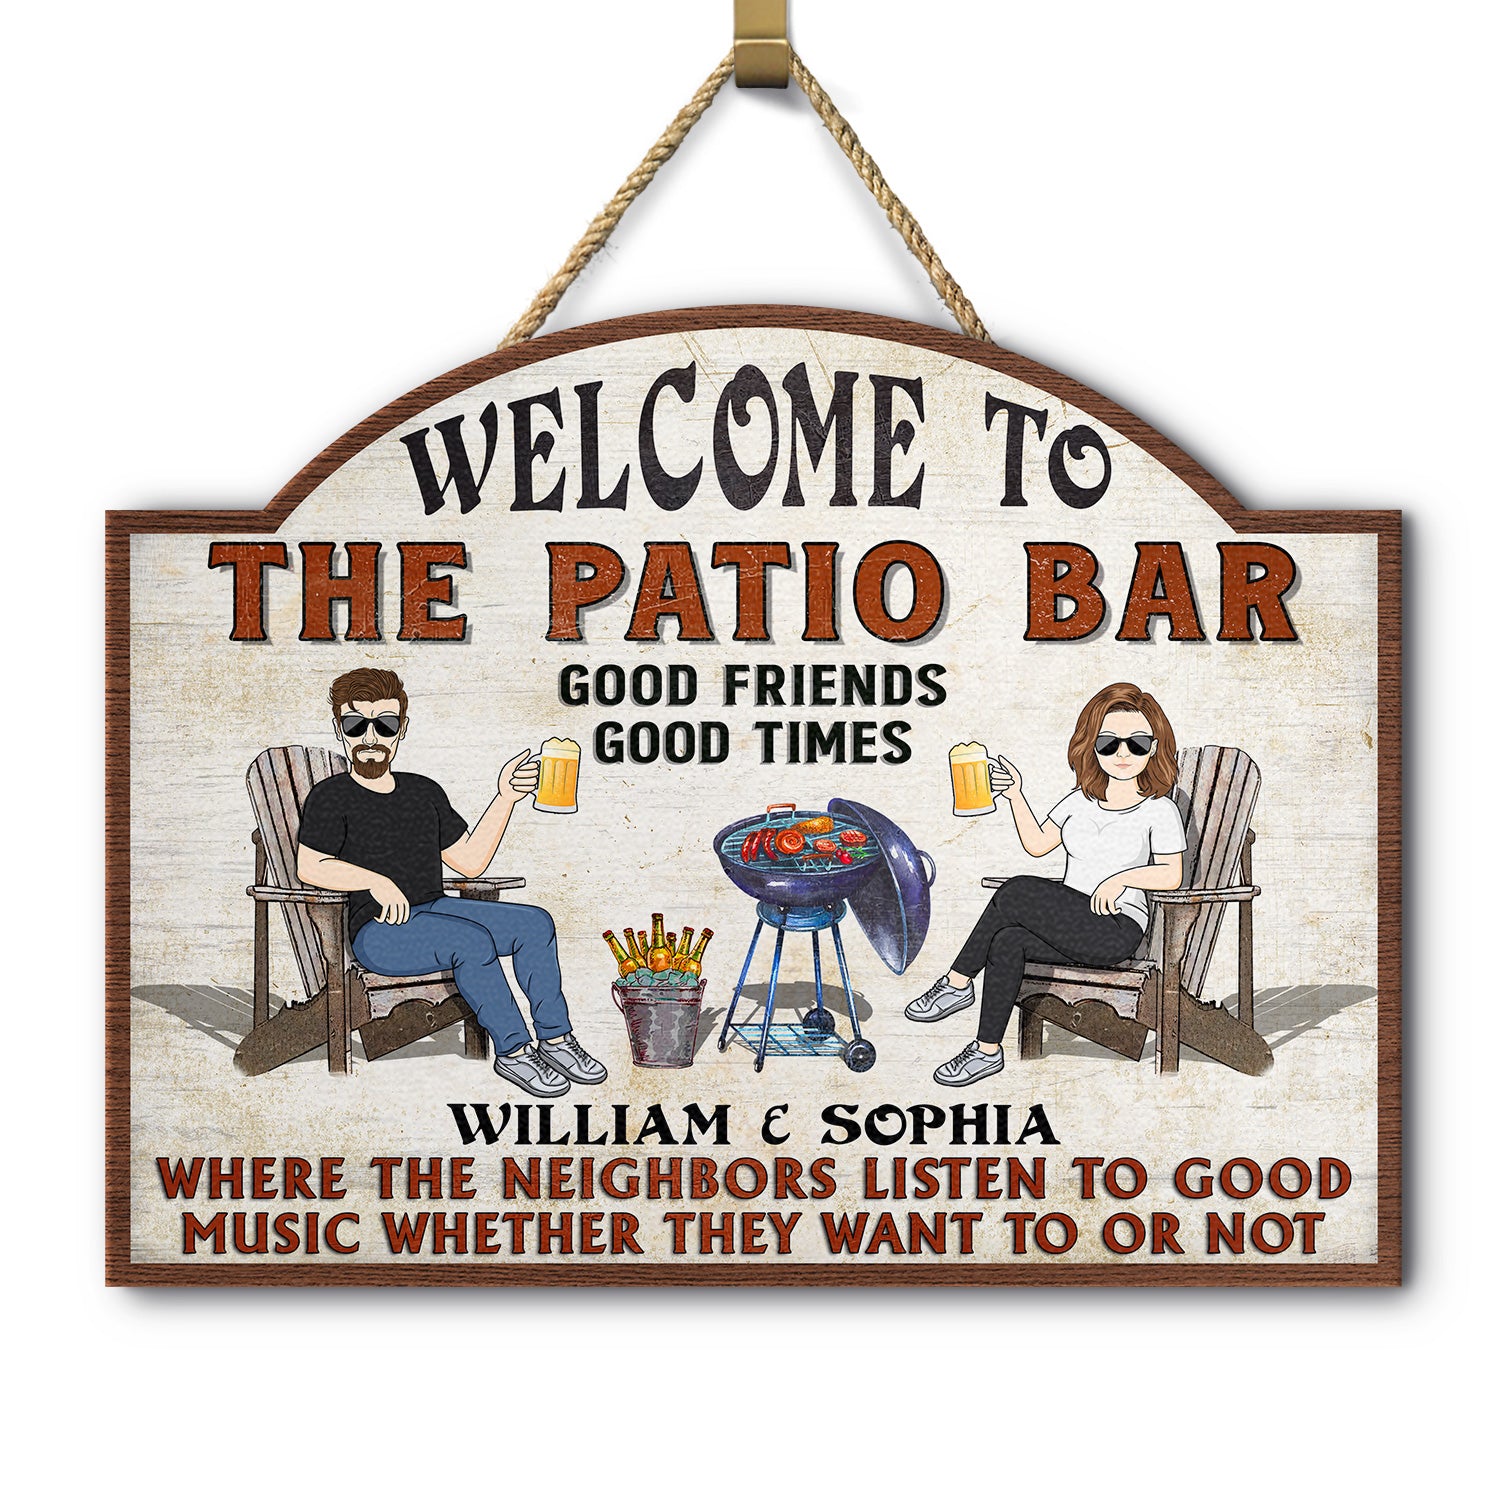 The Patio Grilling Listen To Good Music - Home Decor, Backyard Decor, Gift For Her, Him, Family, Couples, Husband, Wife - Personalized Custom Shaped Wood Sign